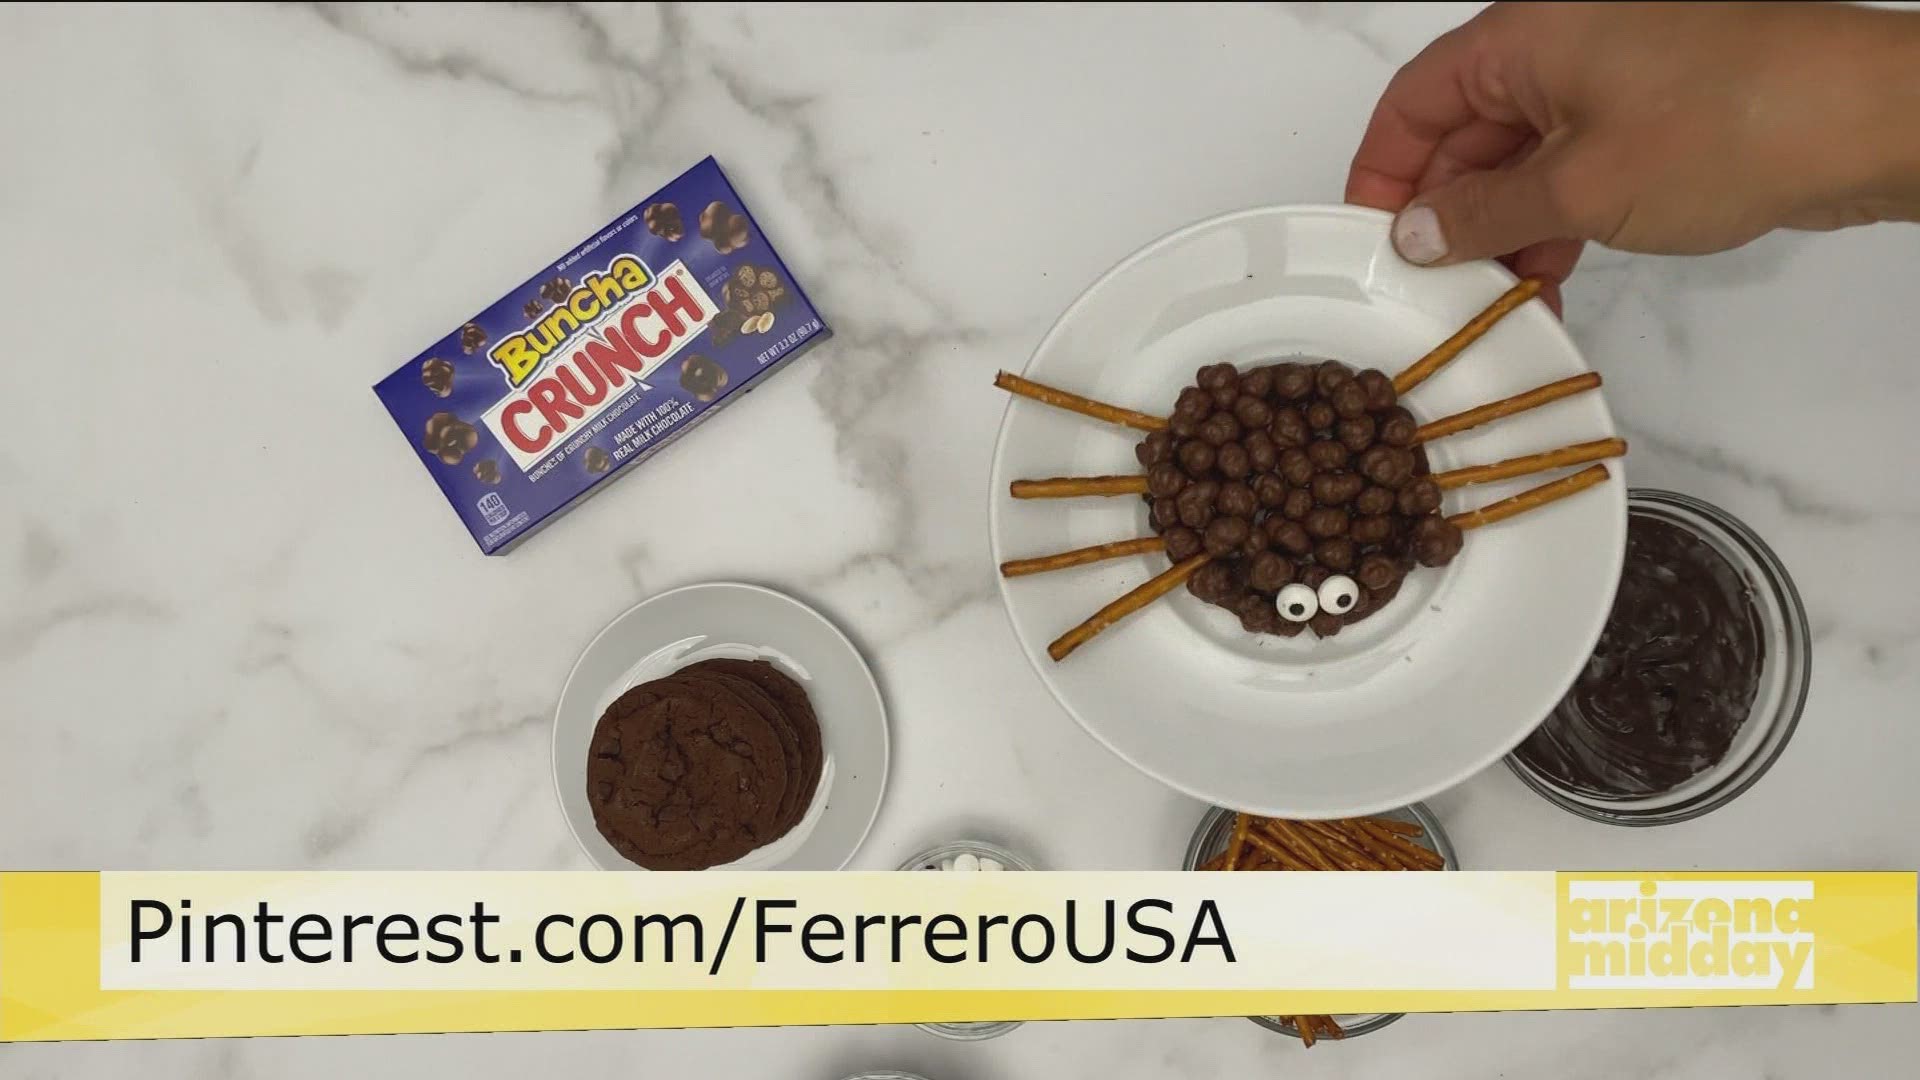 Lifestyle Expert, Limor Suss, shows us the top Pinterest crafts & eats you can create by going to Ferrero USA's Pinterest just in time for Halloween